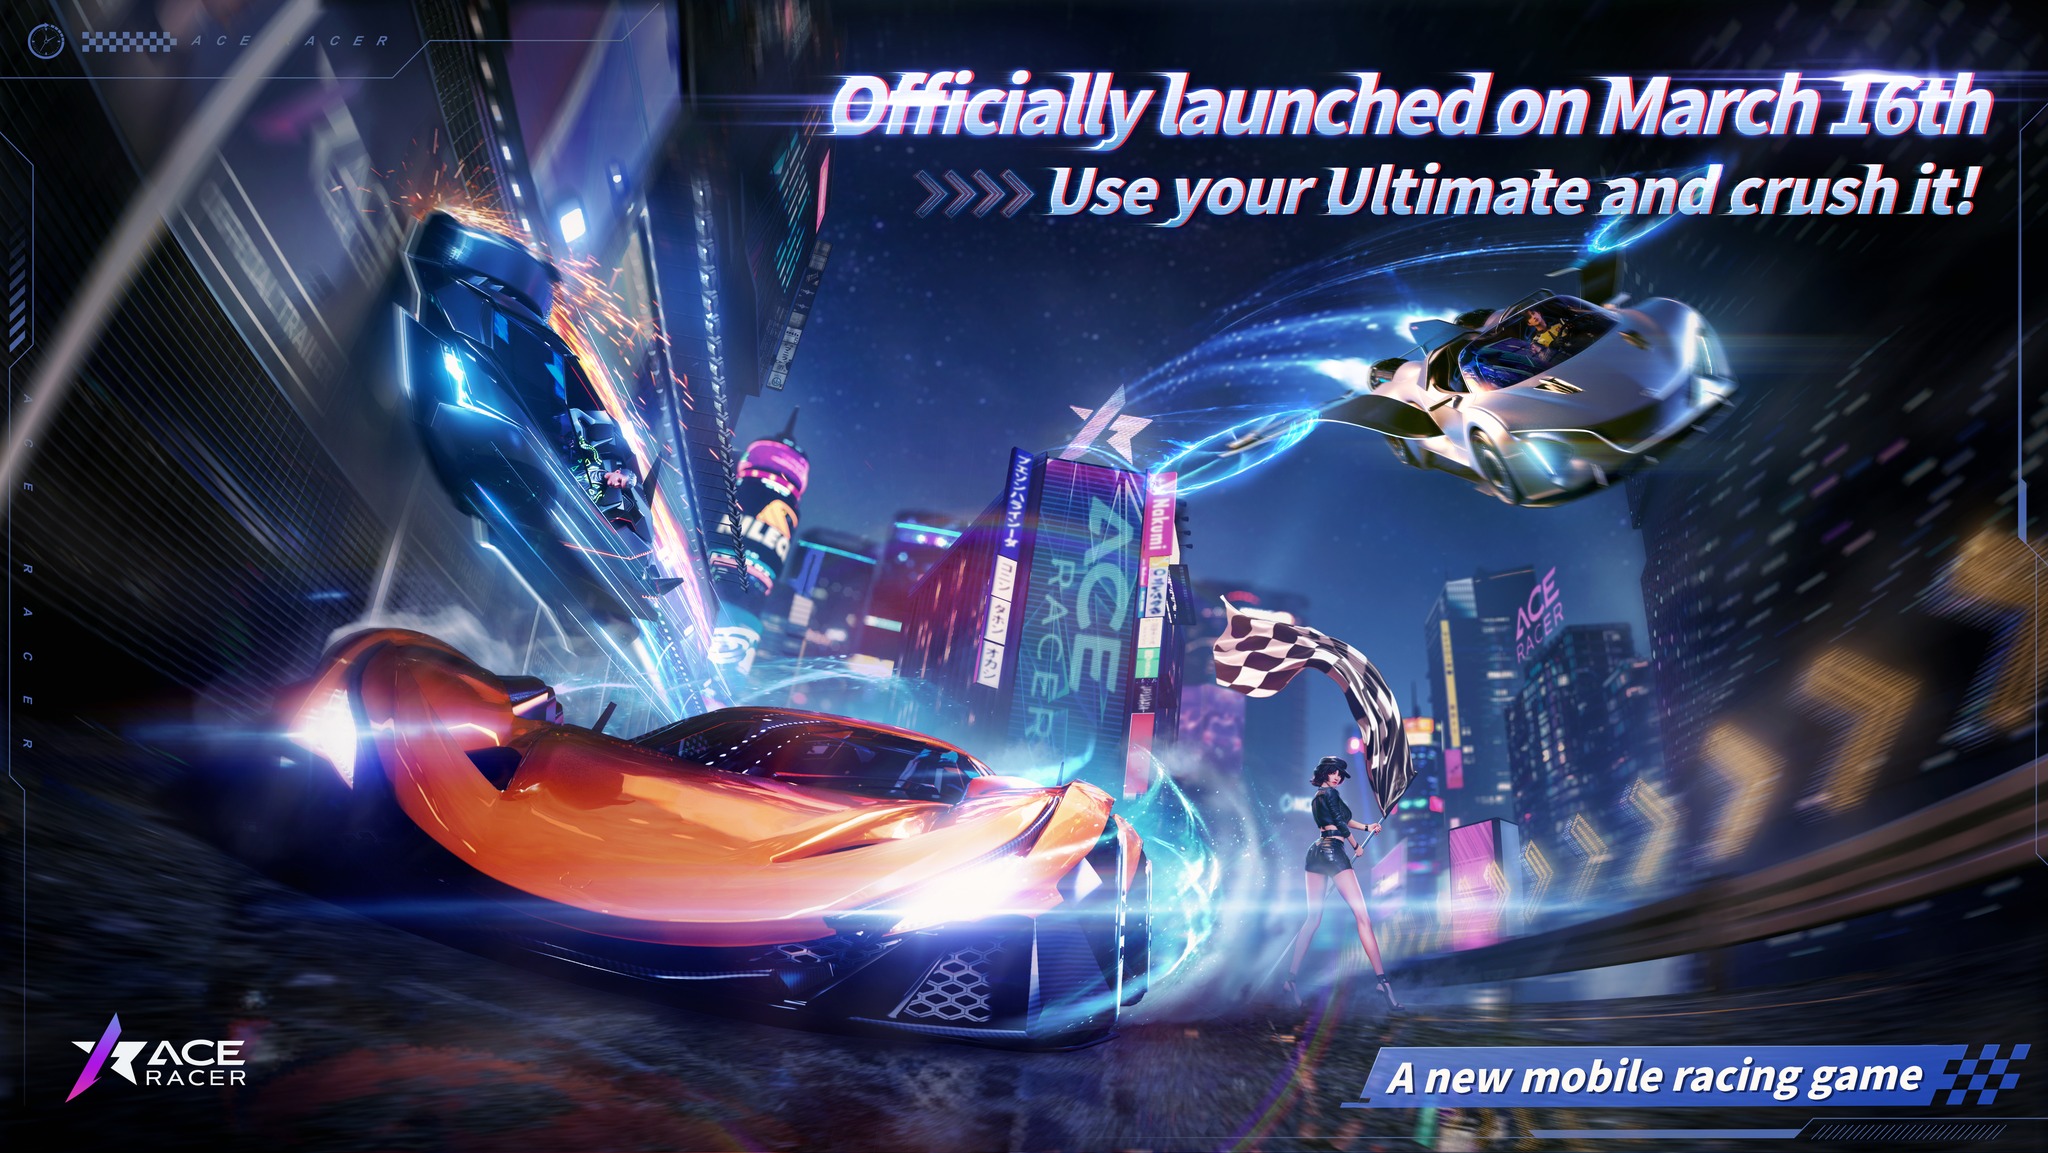 ace racer officially launch